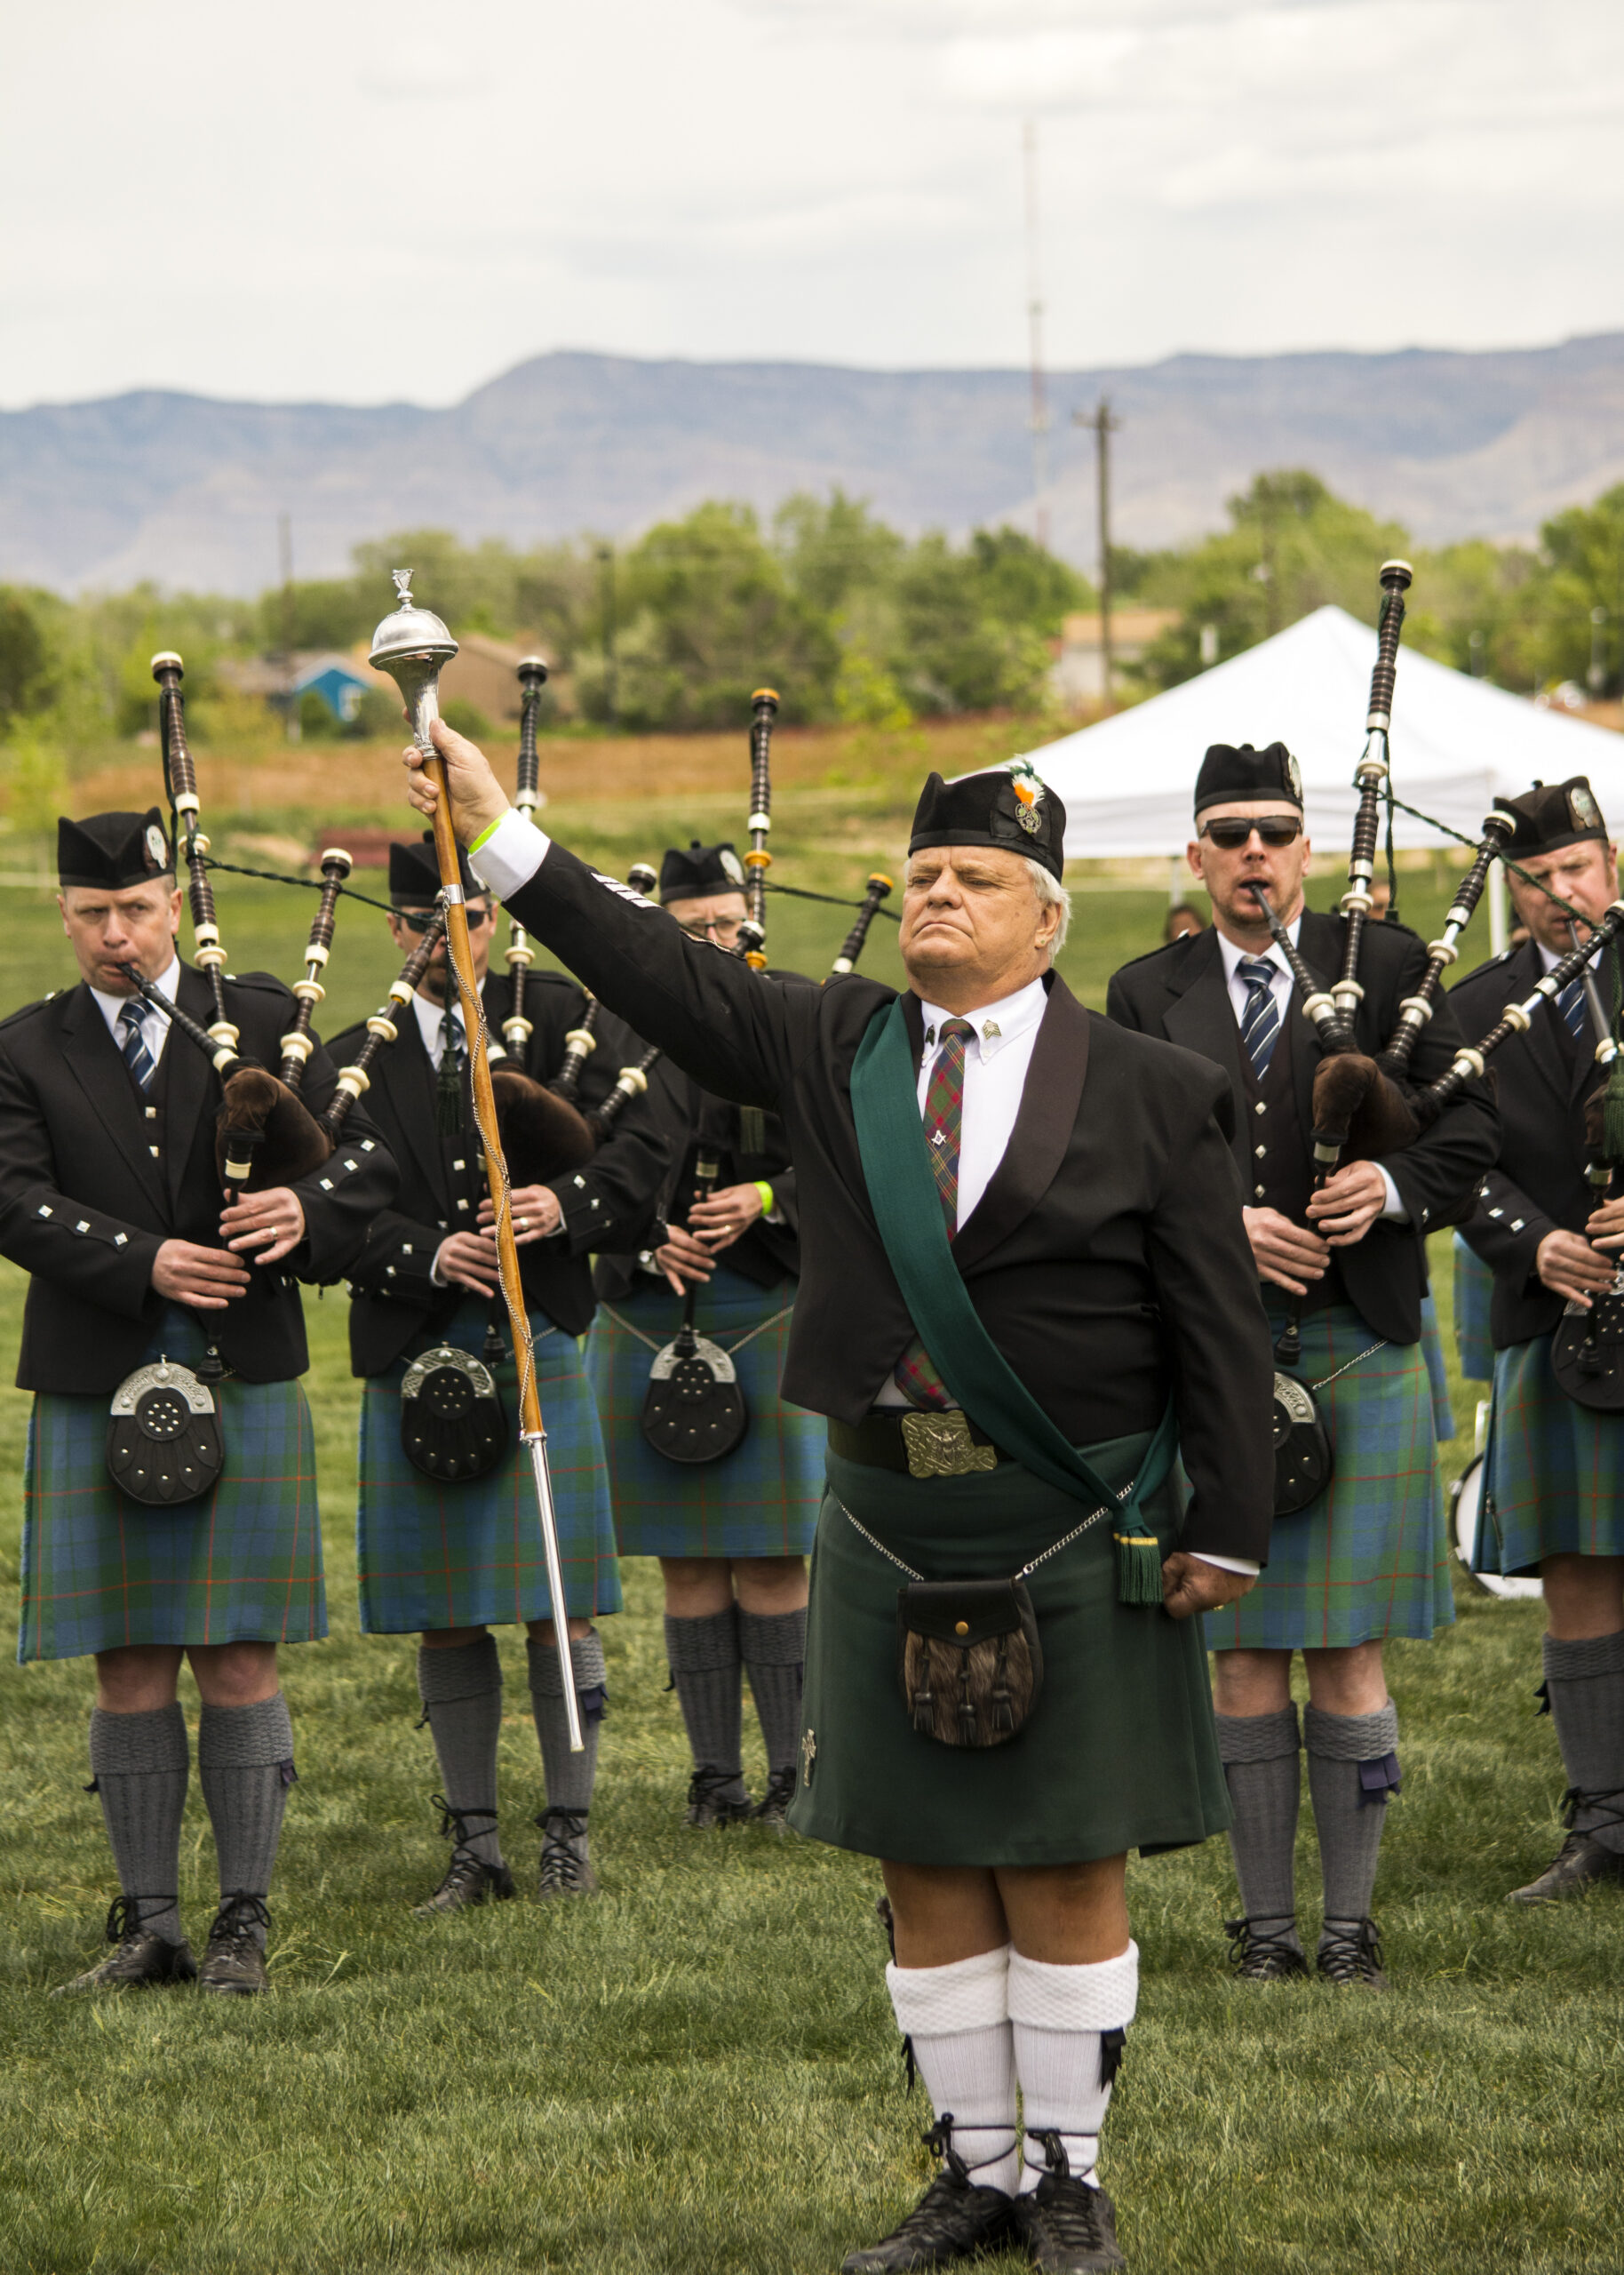 photo of Grand Valley Highland Games pipe band